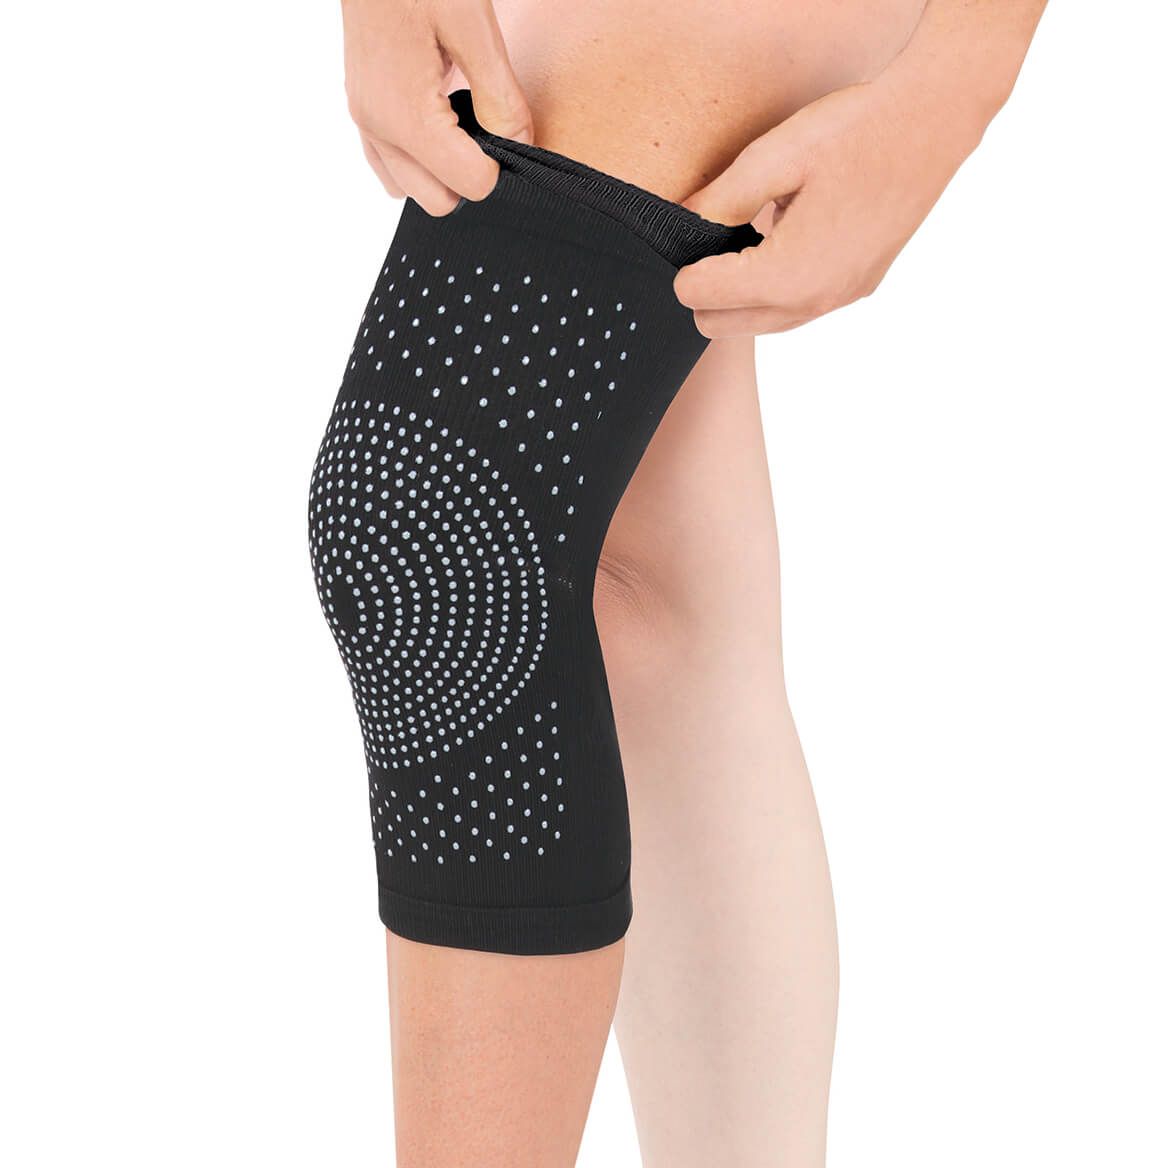 Infrared Compression Knee Support + '-' + 370049